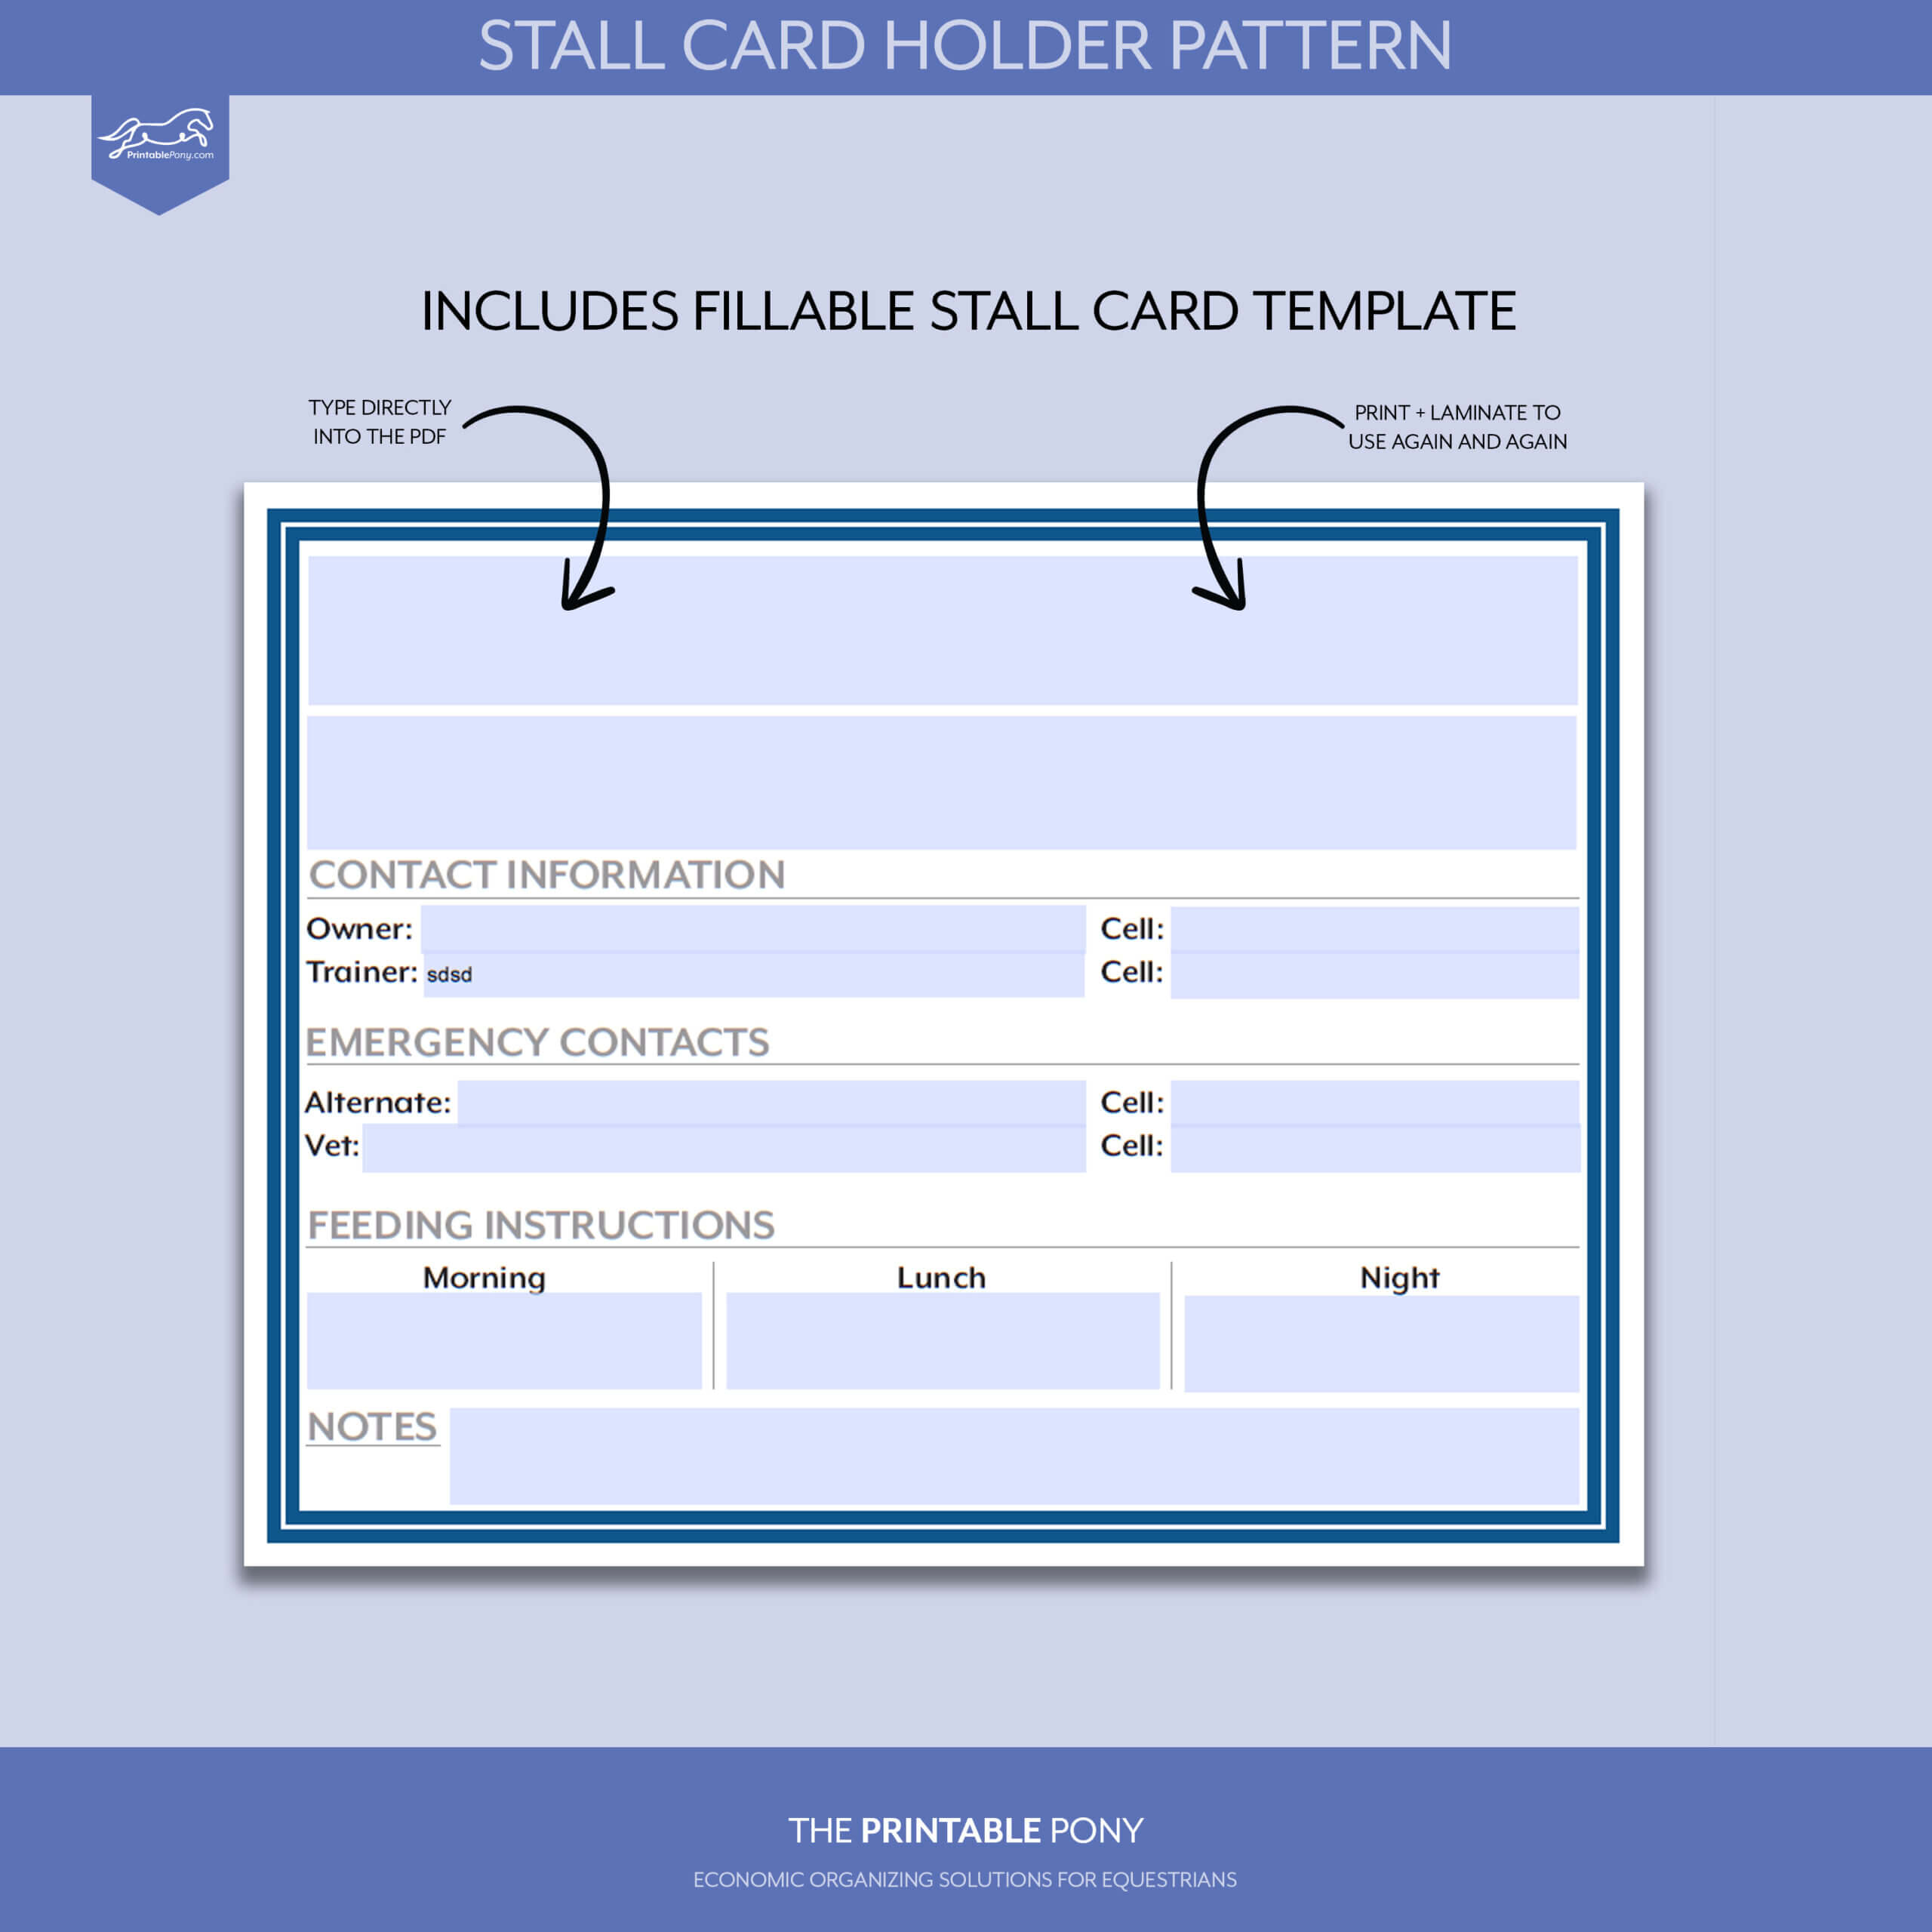 Stall Card Holder Pattern + Printable Stall Card Intended For Horse Stall Card Template